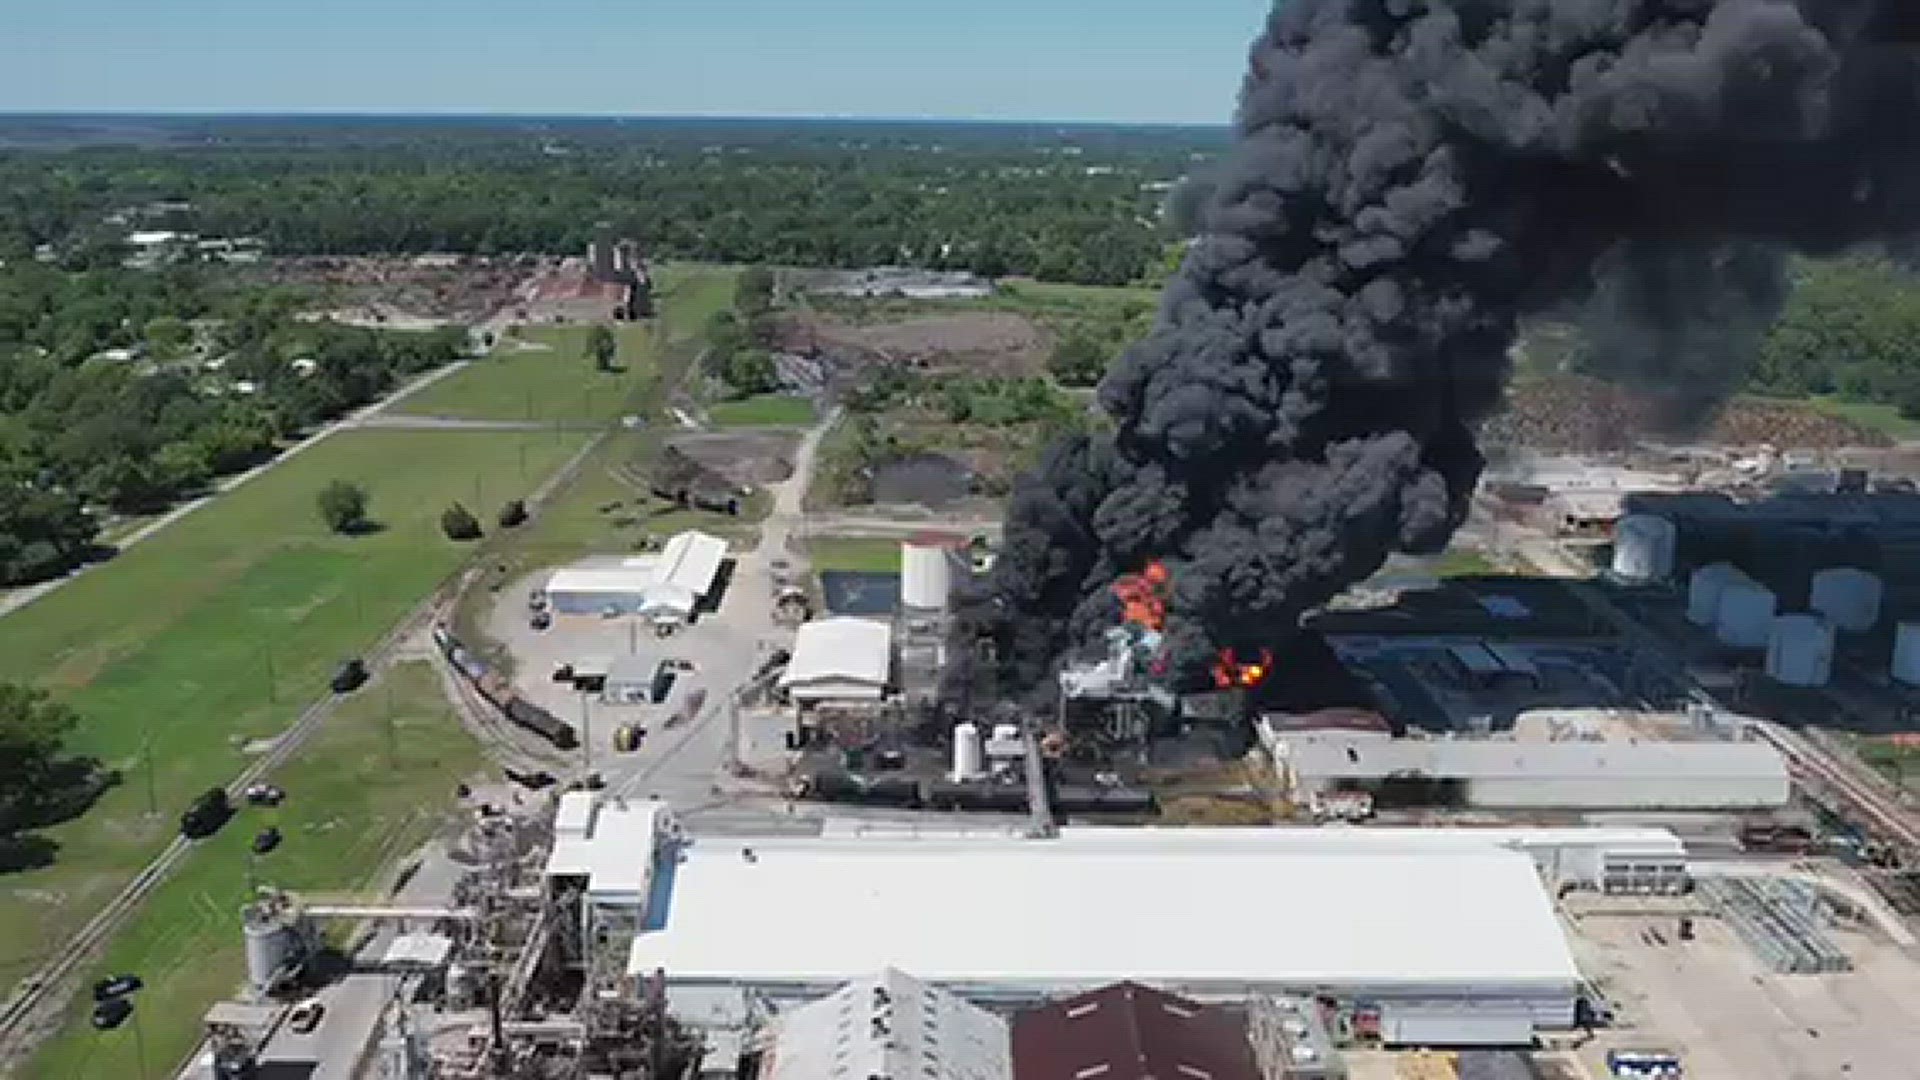 A birds-eye view of the Pinova Plant after it re-ignited Saturday afternoon. CREDIT: Andy Jones